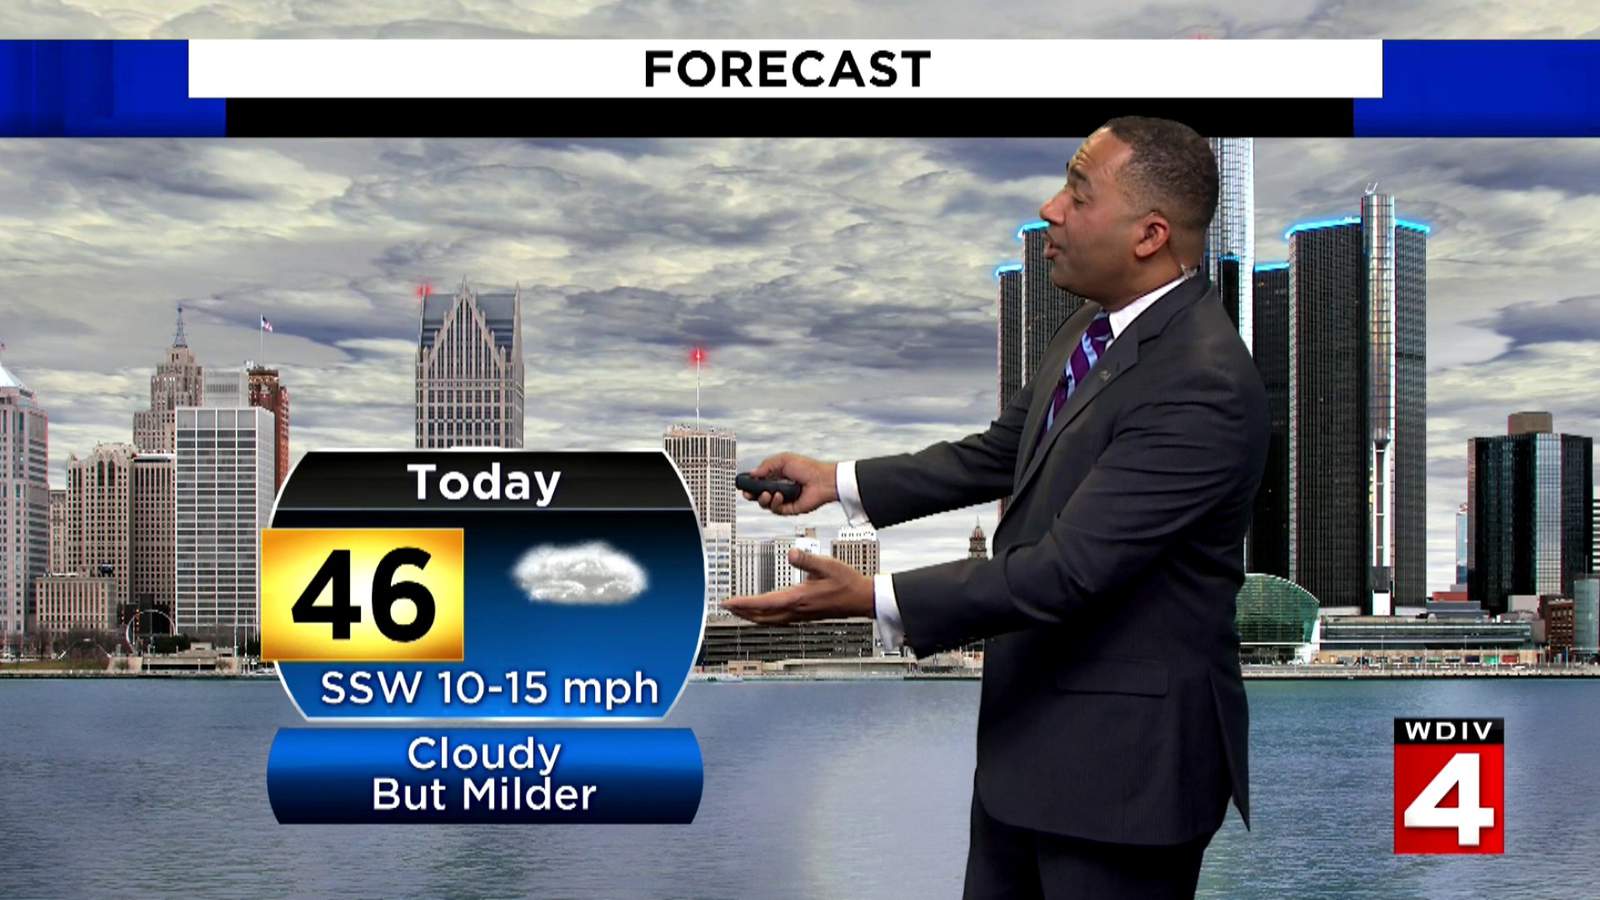 Metro Detroit weather: Cool, cloudy Sunday evening in Motown